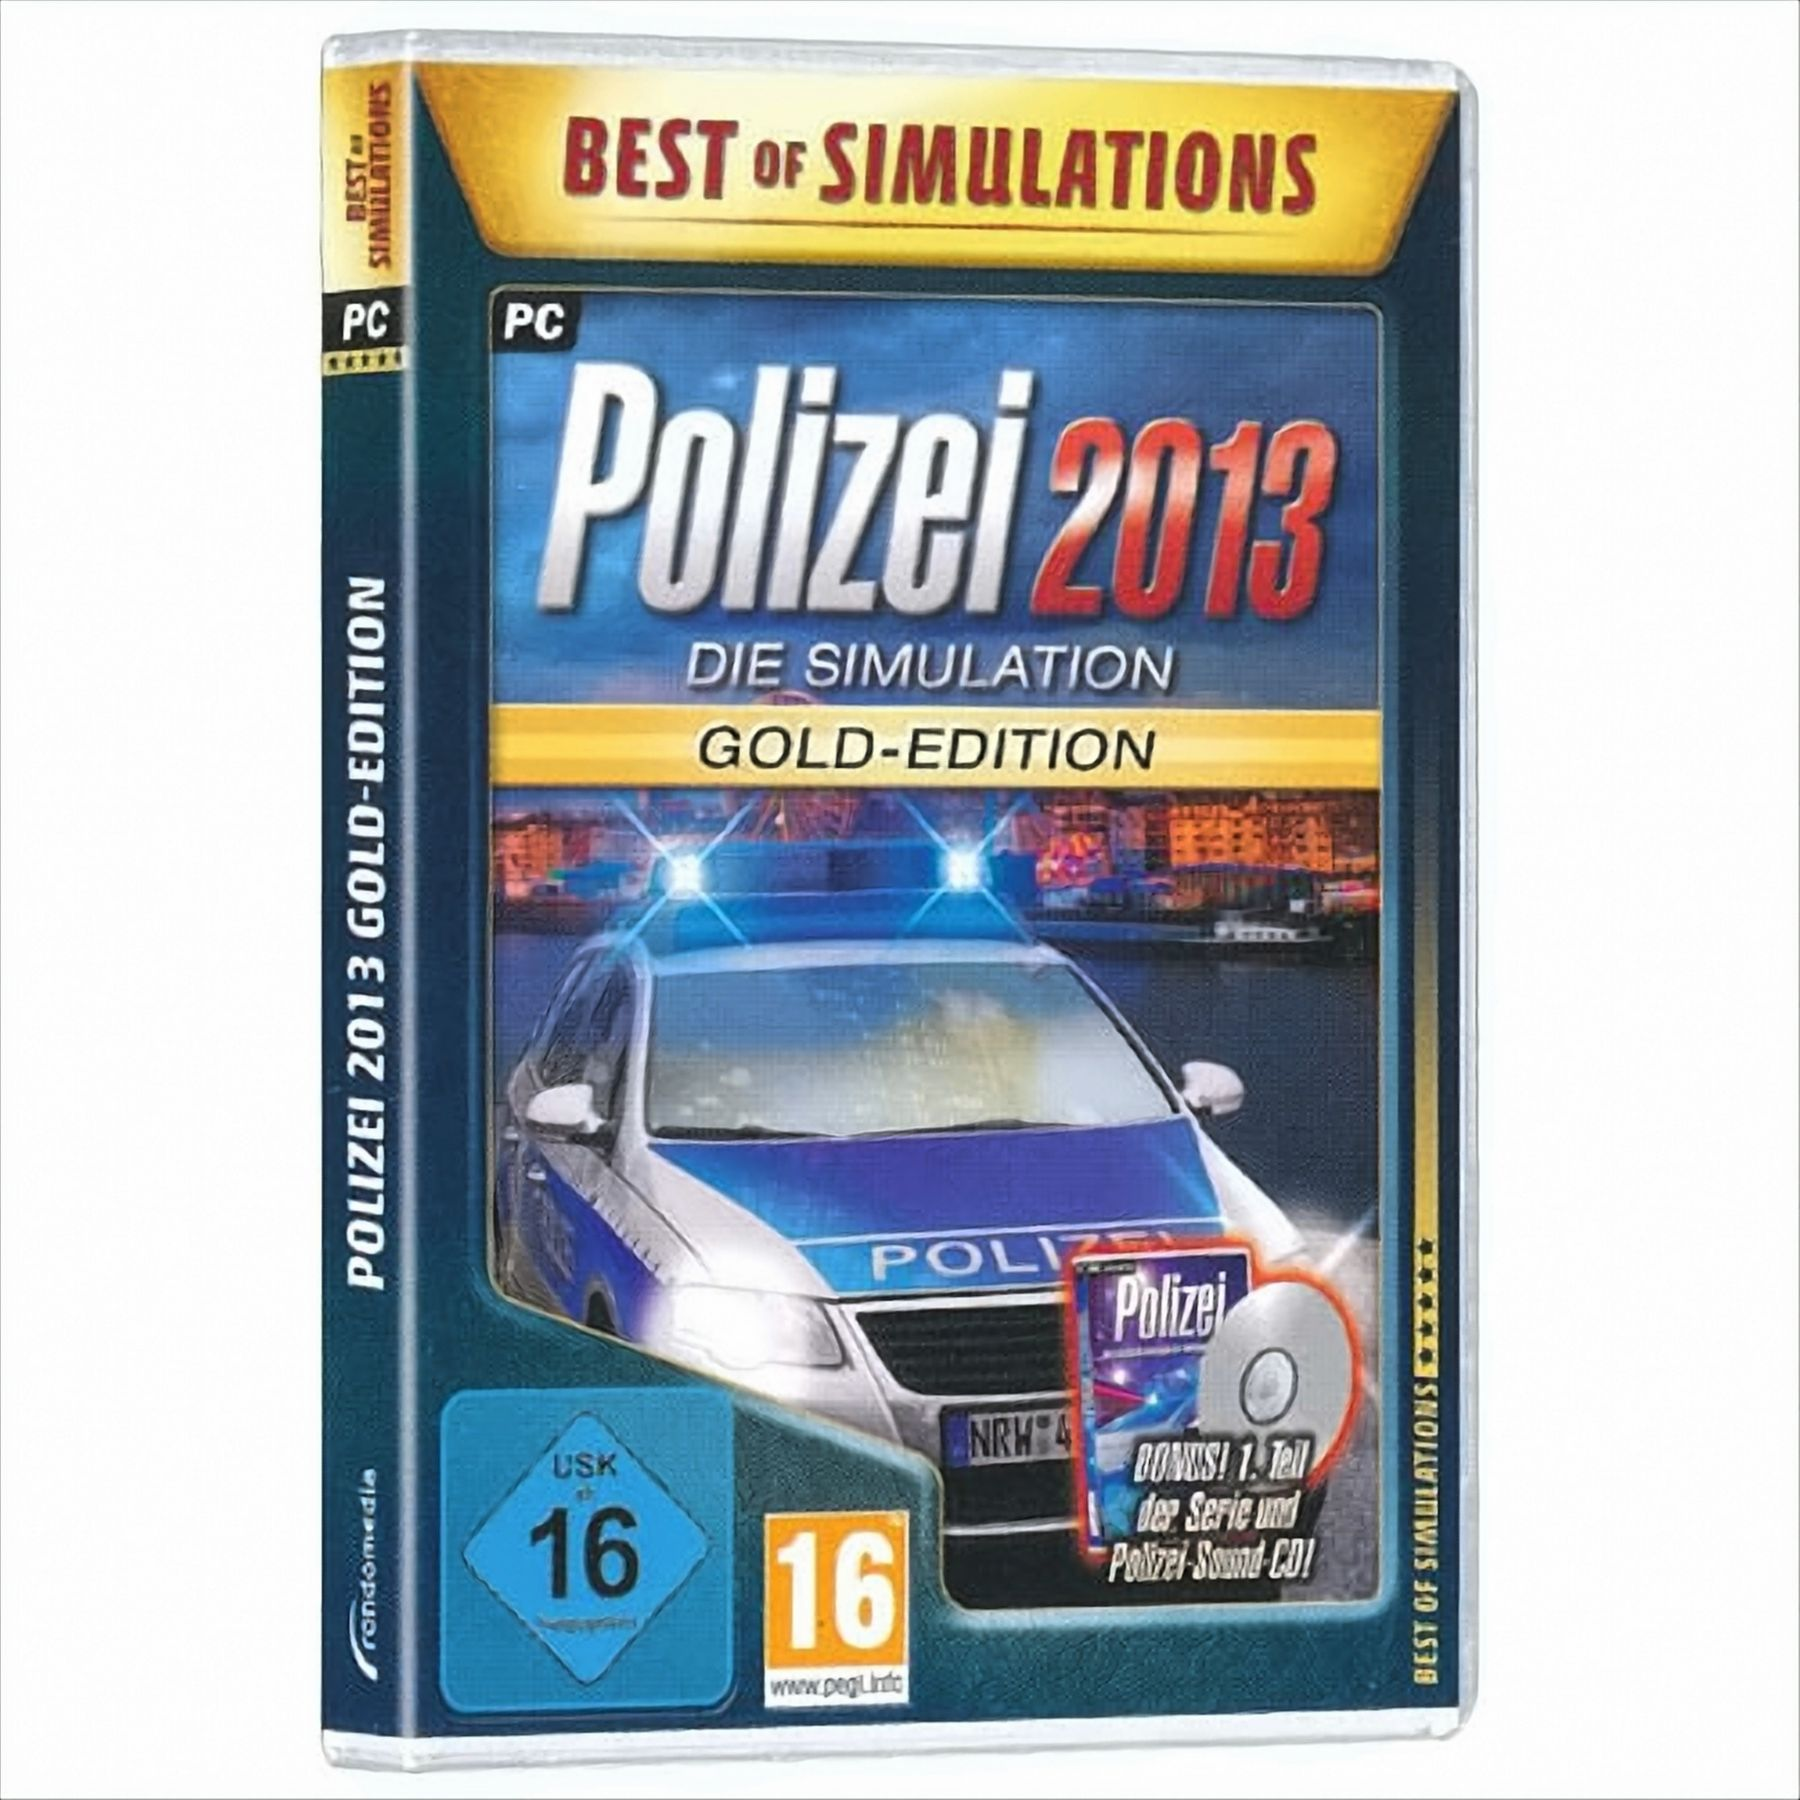 Polizei (Best of [PC] 2013: - Gold-Edition Simulations)